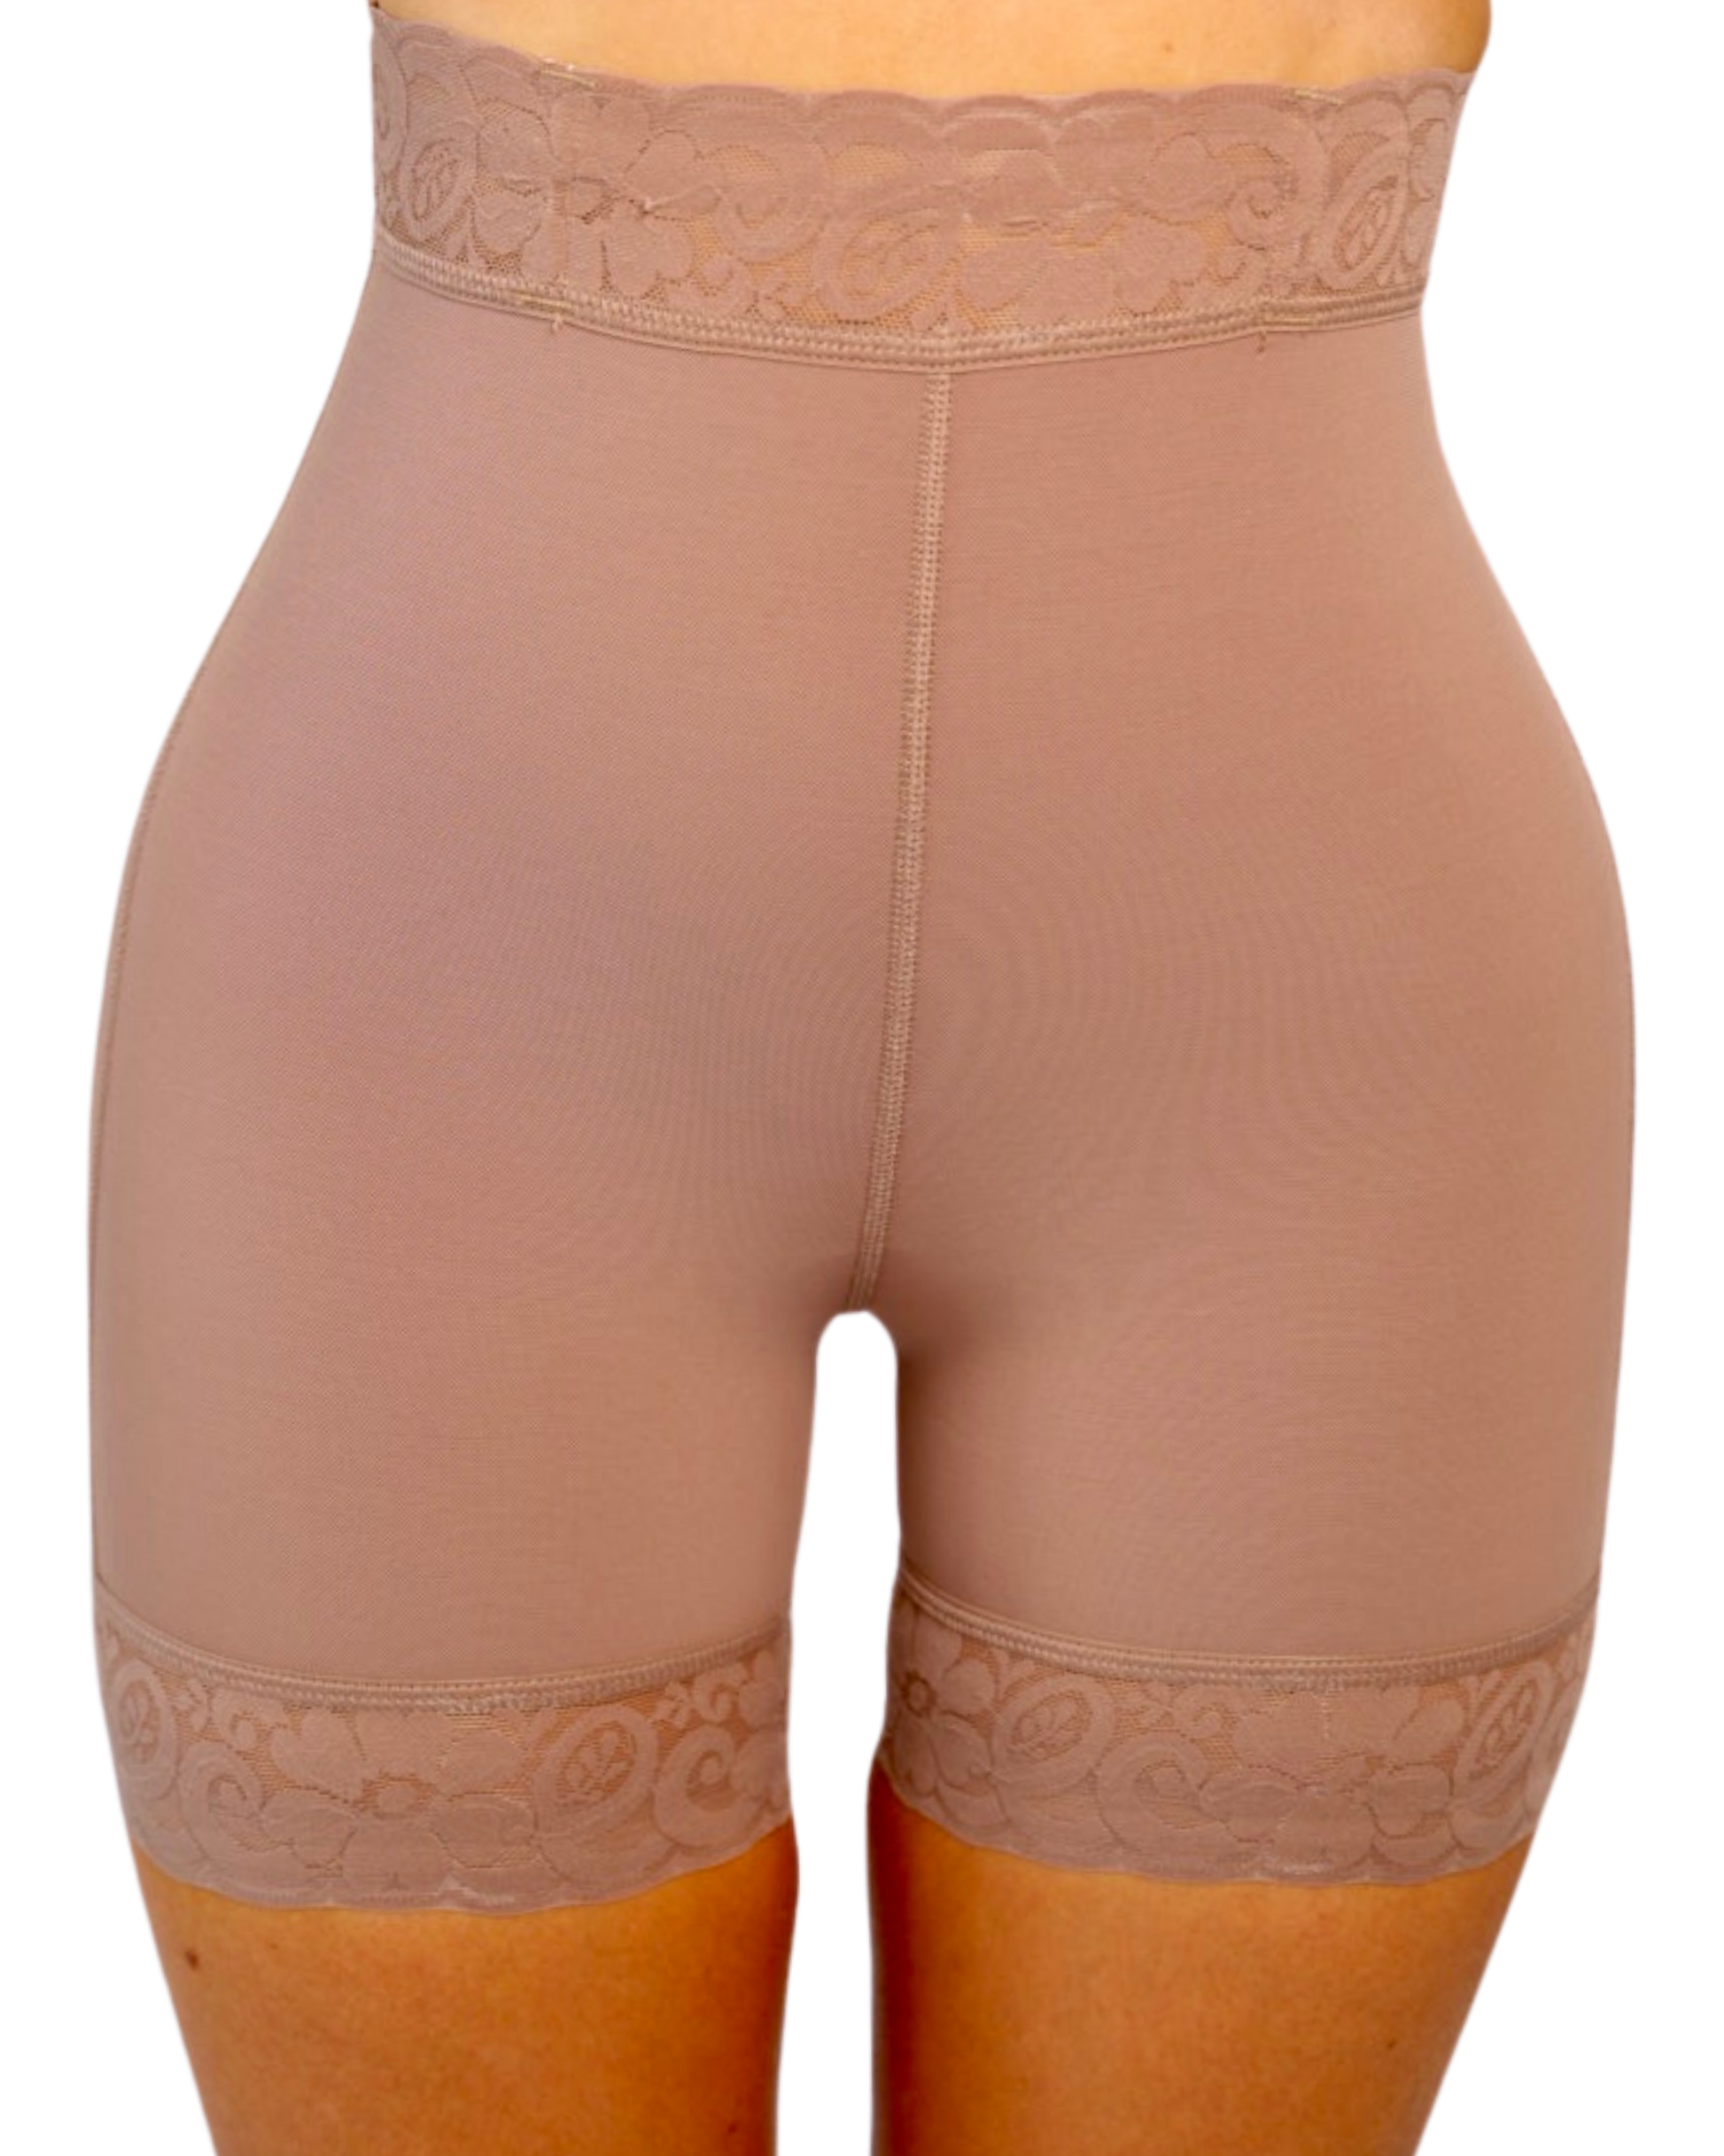 🍑 Do you want to Instant BBL with Shaping Shorts? . 👆 Buy your ideal  #Shapewear in the bio link or Story Link, Save 15% OFF! 💰